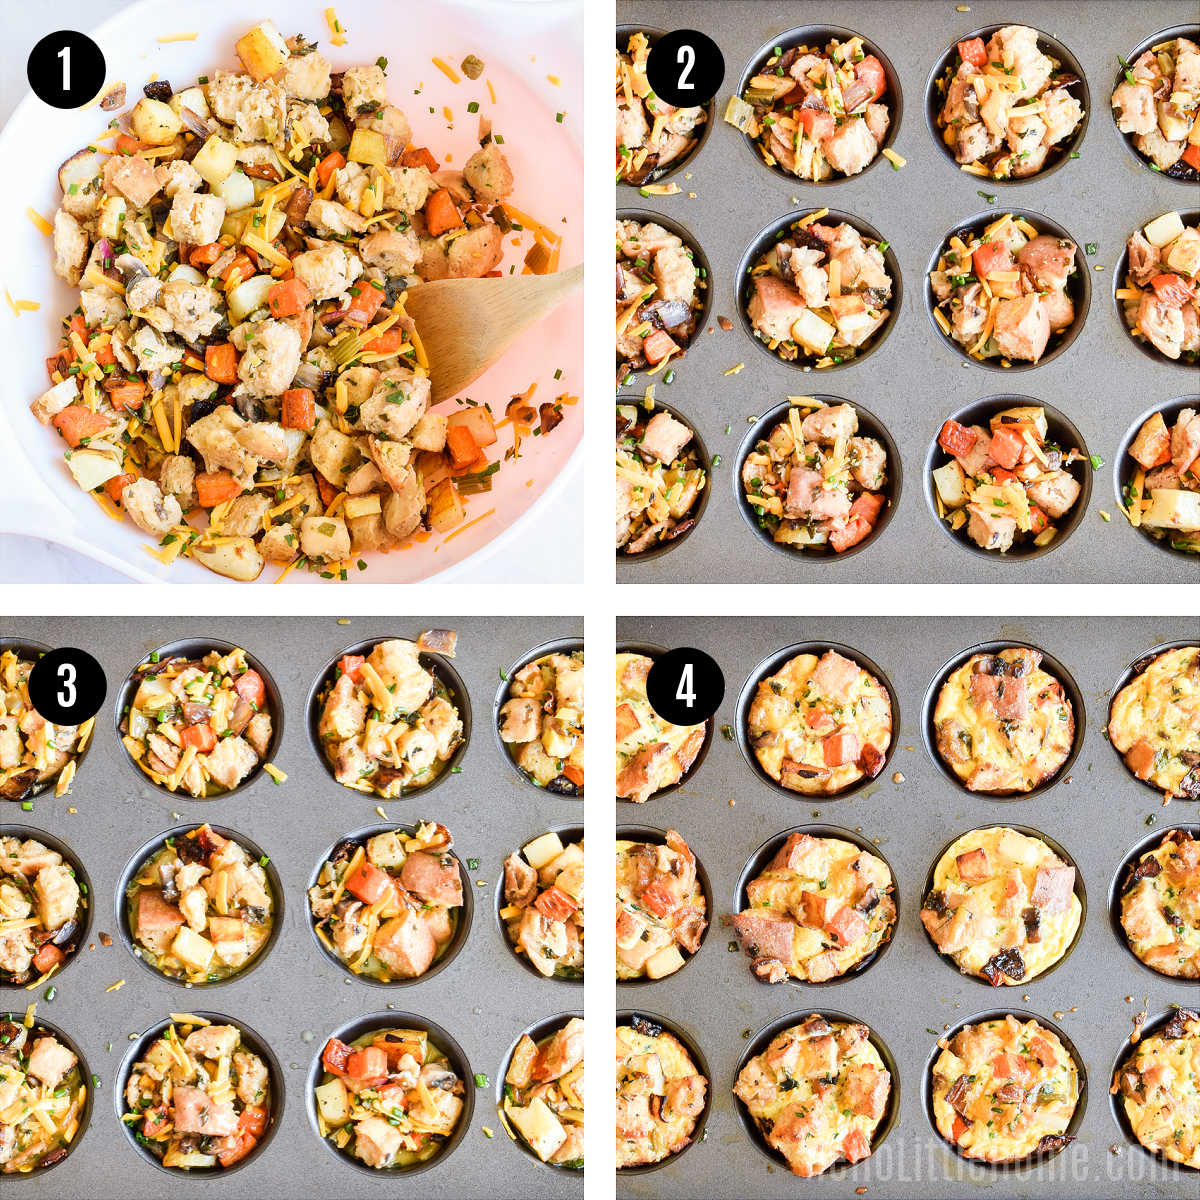 A photo collage showing how to make the muffins step-by-step.